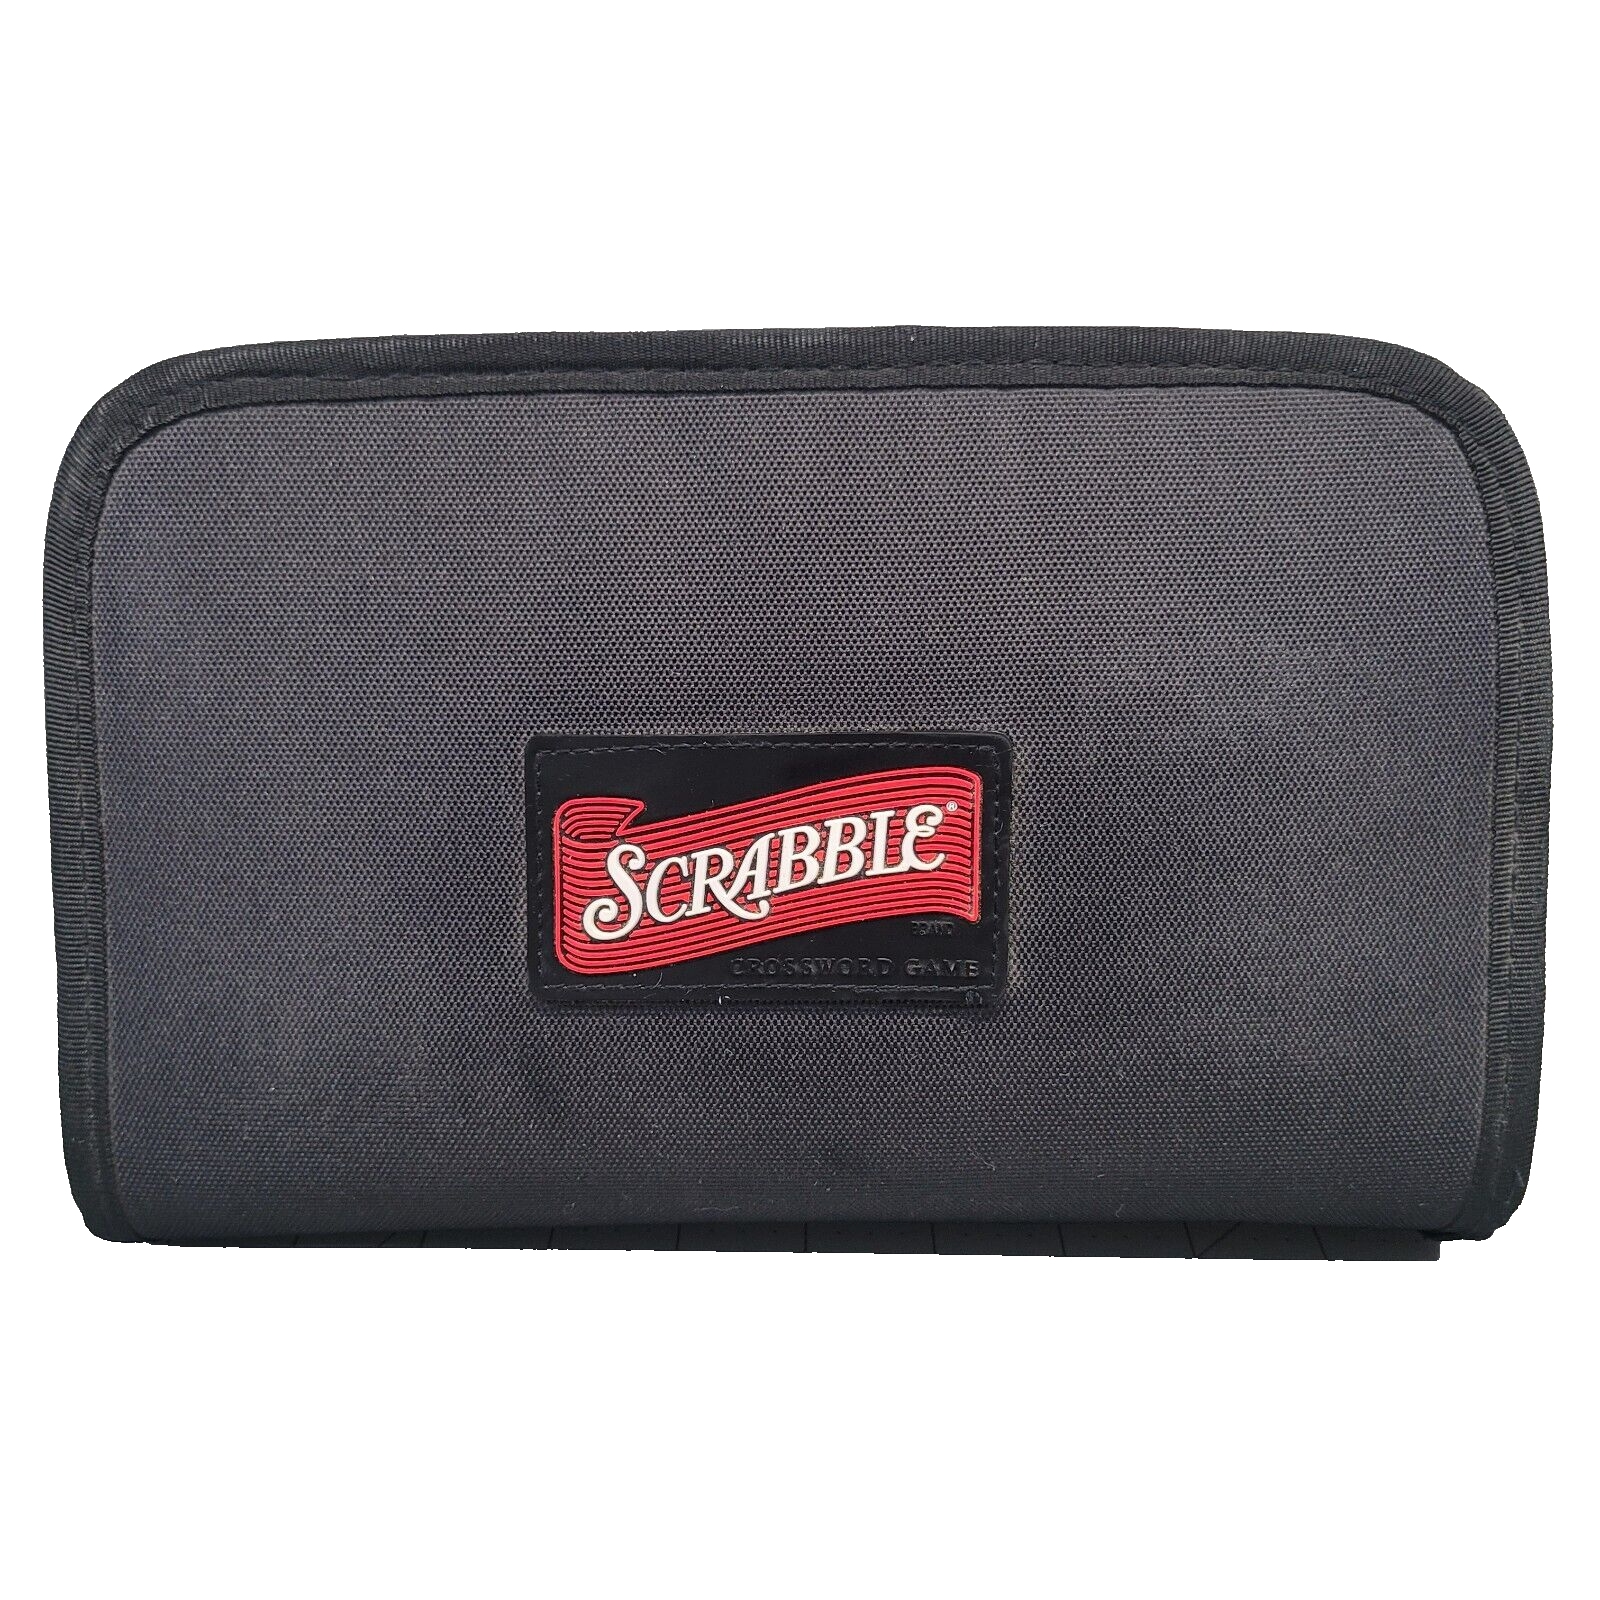 Scrabble Deluxe Travel Edition Board Game Folio Zippered Case Snap Tiles 2001 - $15.99